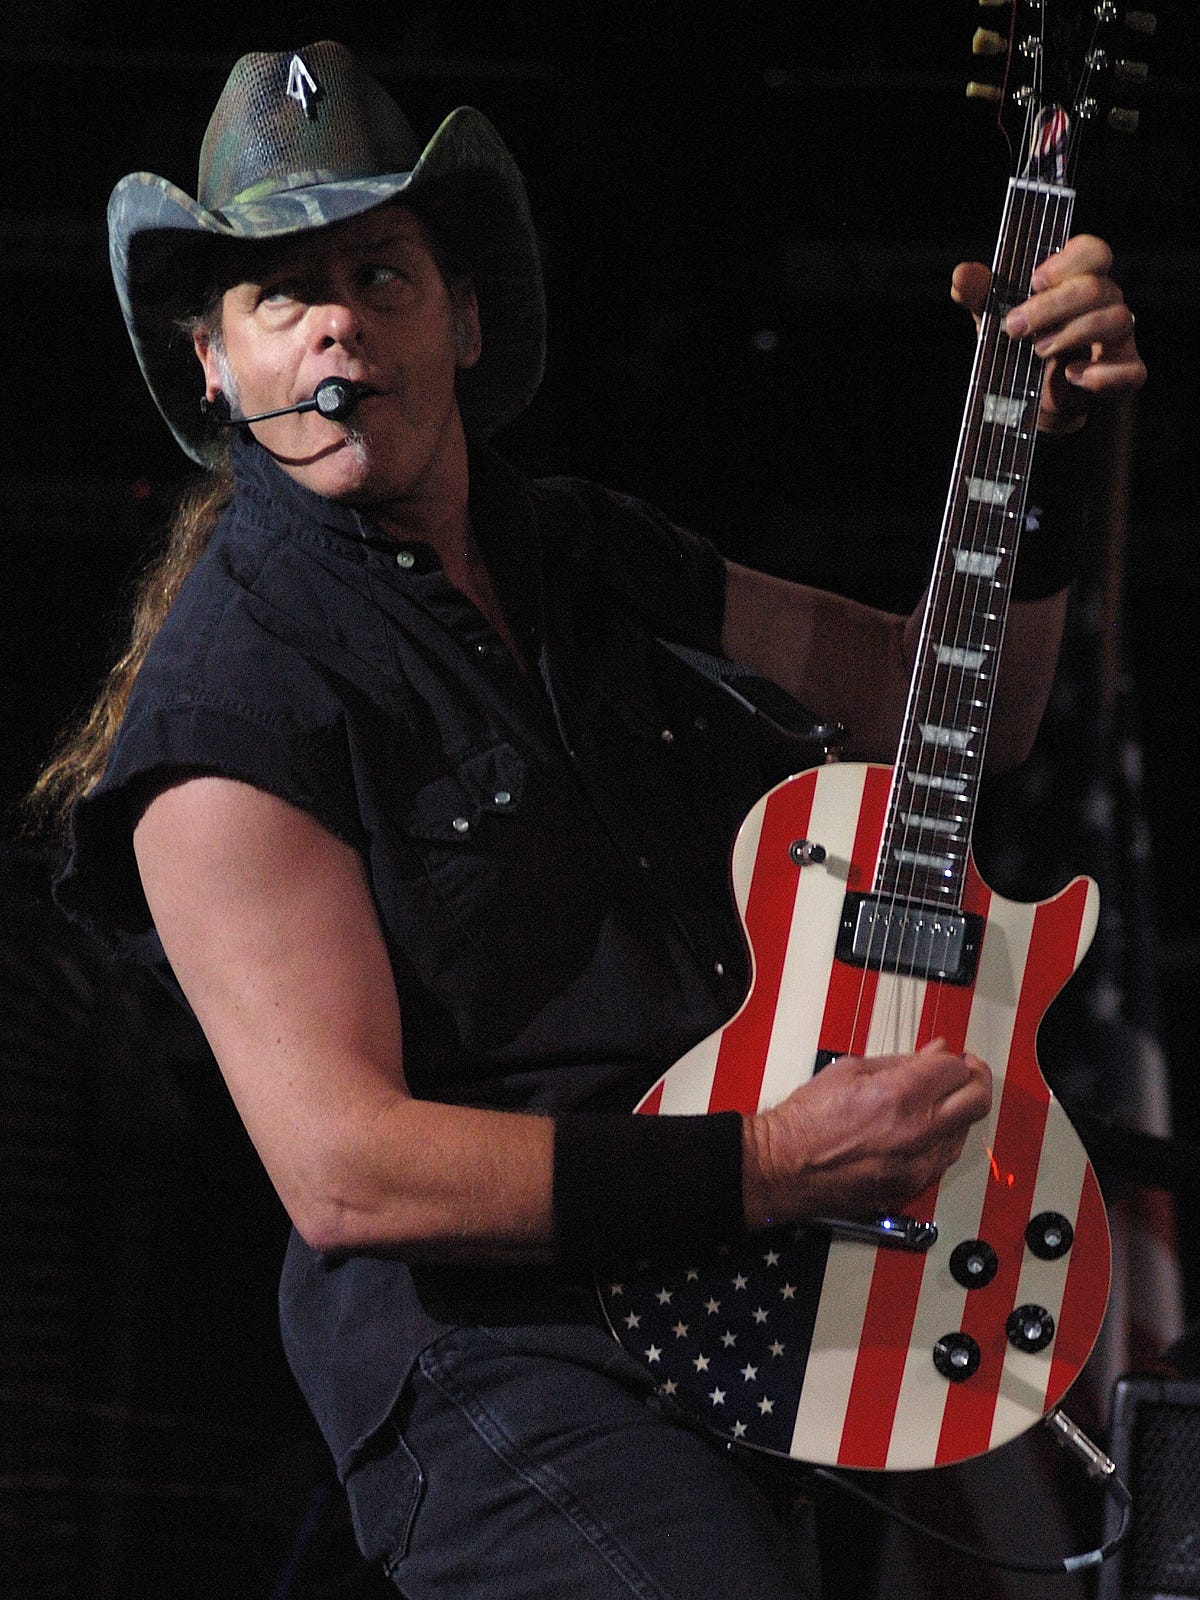 Ted Nugent on making America great again with Donald Trump